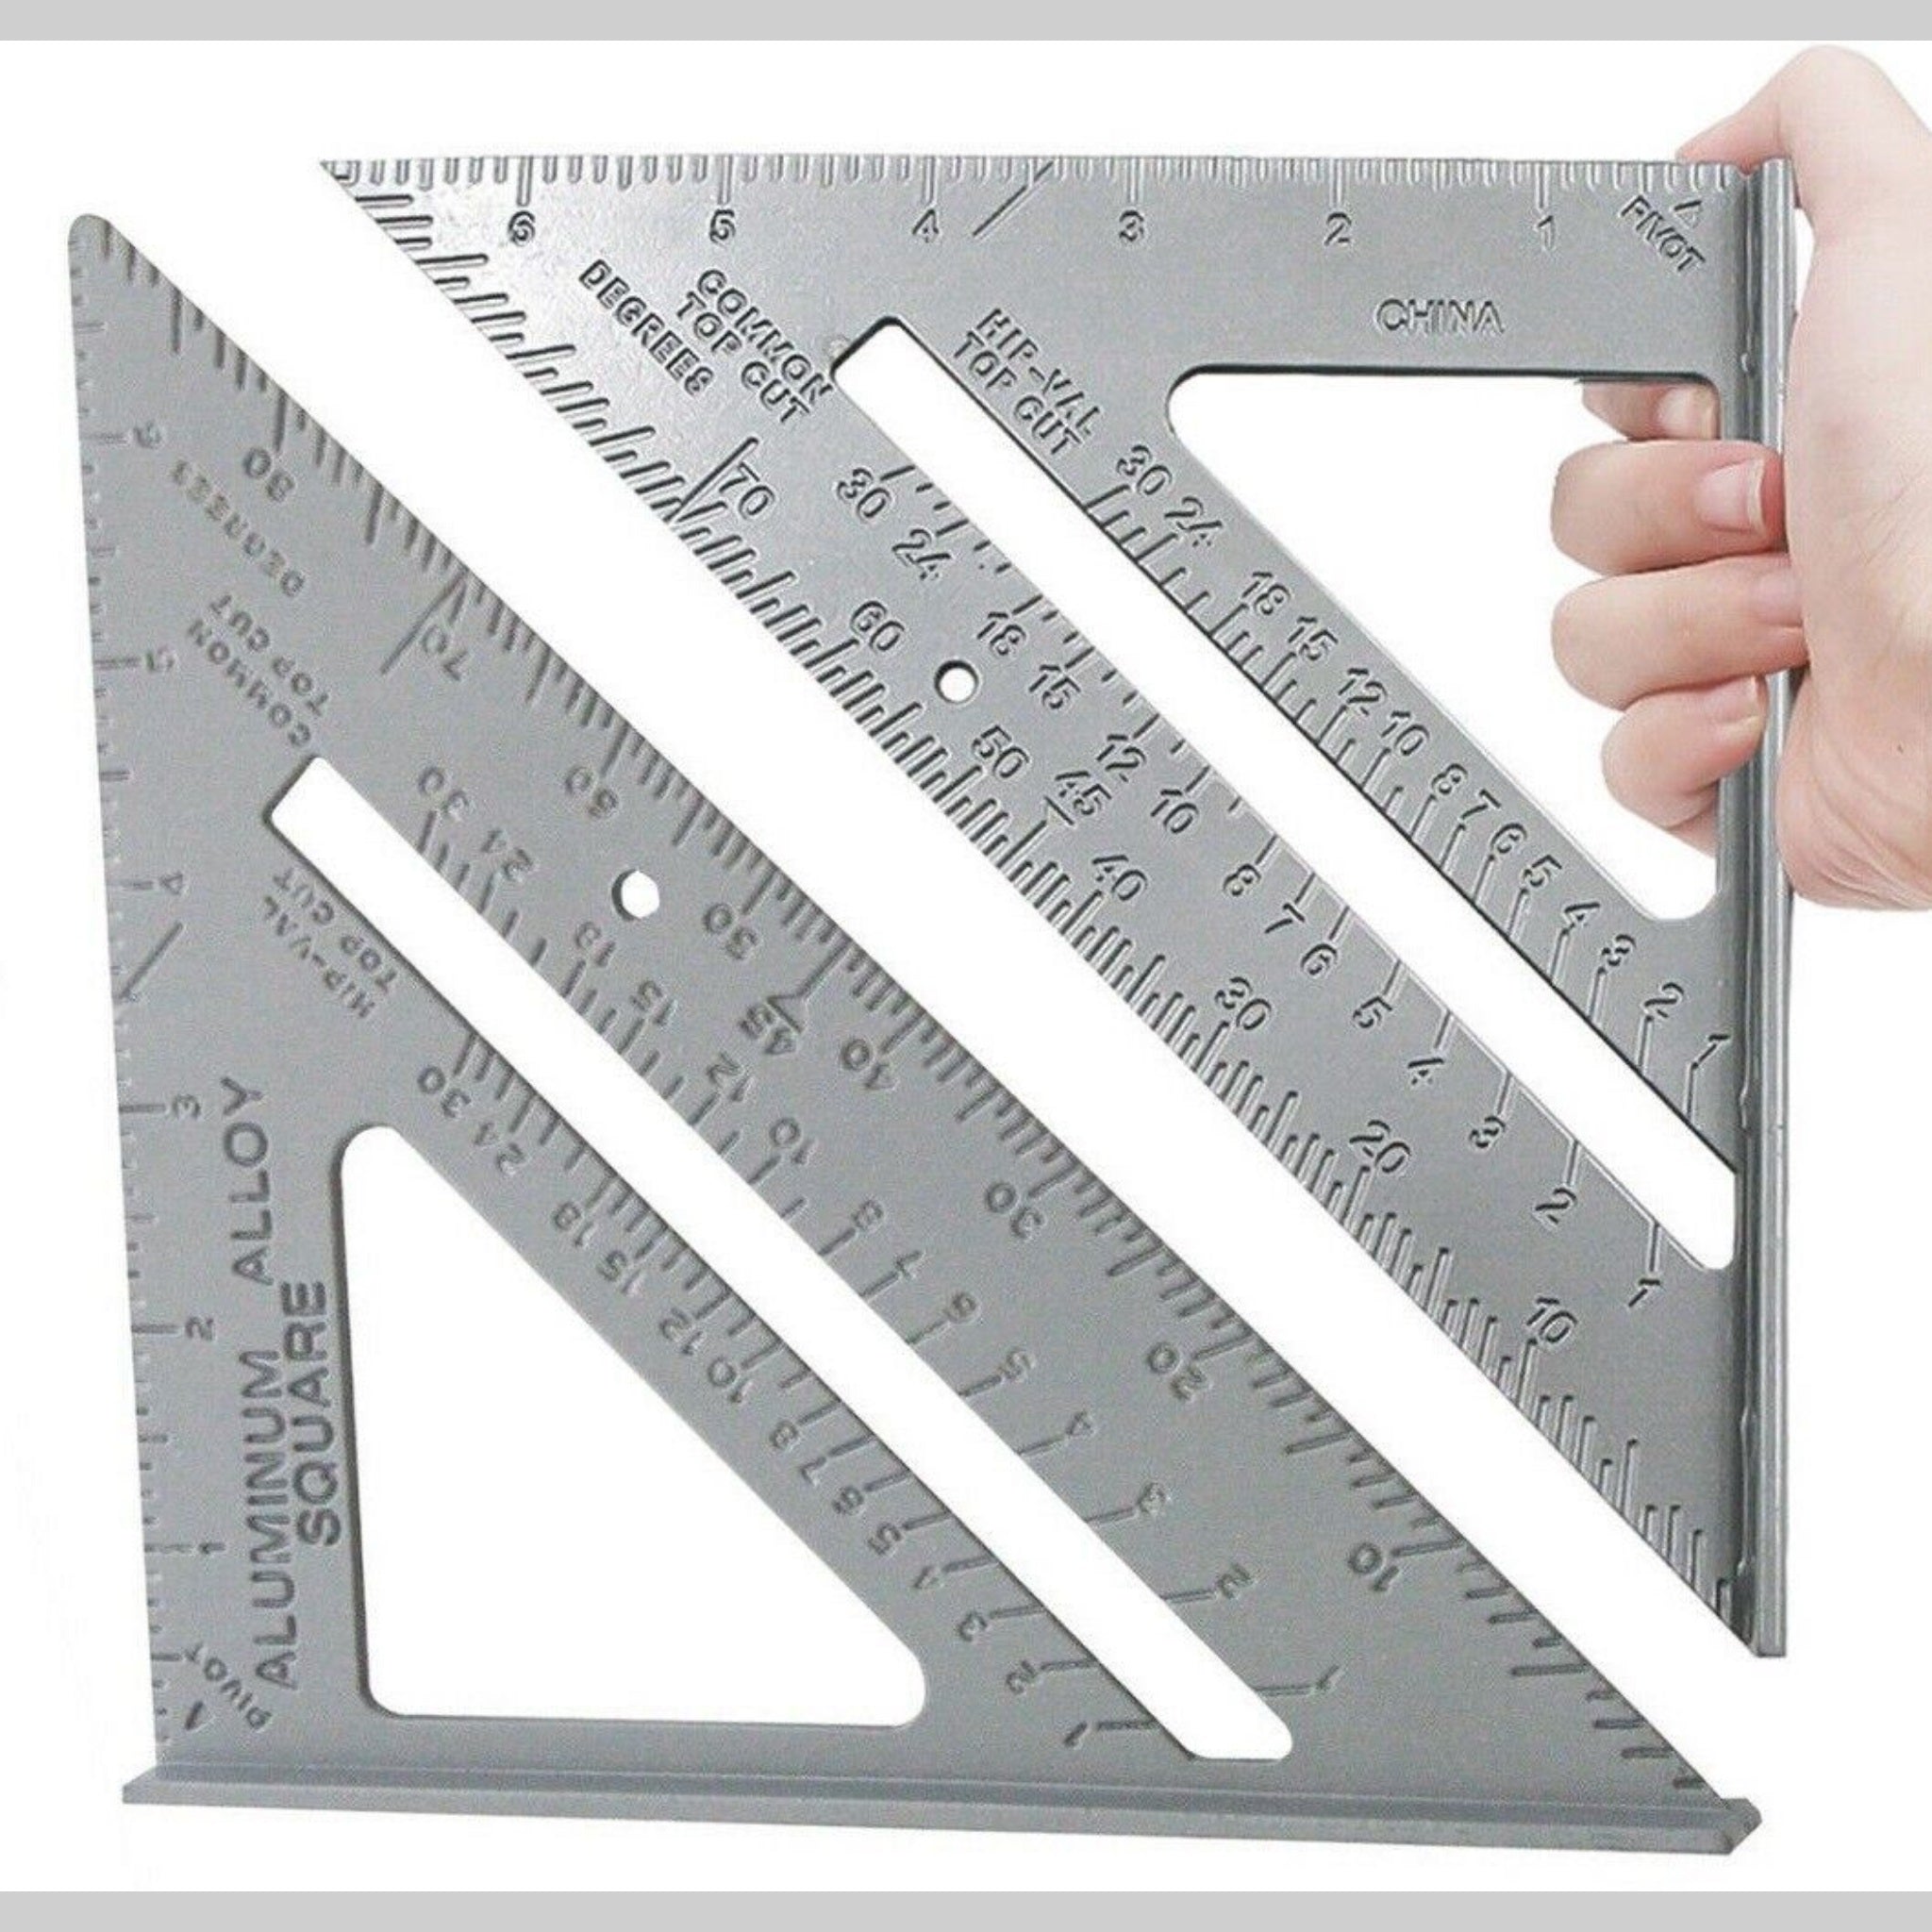 Beclen Harp New 7" Aluminum Speed Square Roofing Rafter Triangle Angle Guide Carpenters Wood Working 7 Inch Alloy Tool